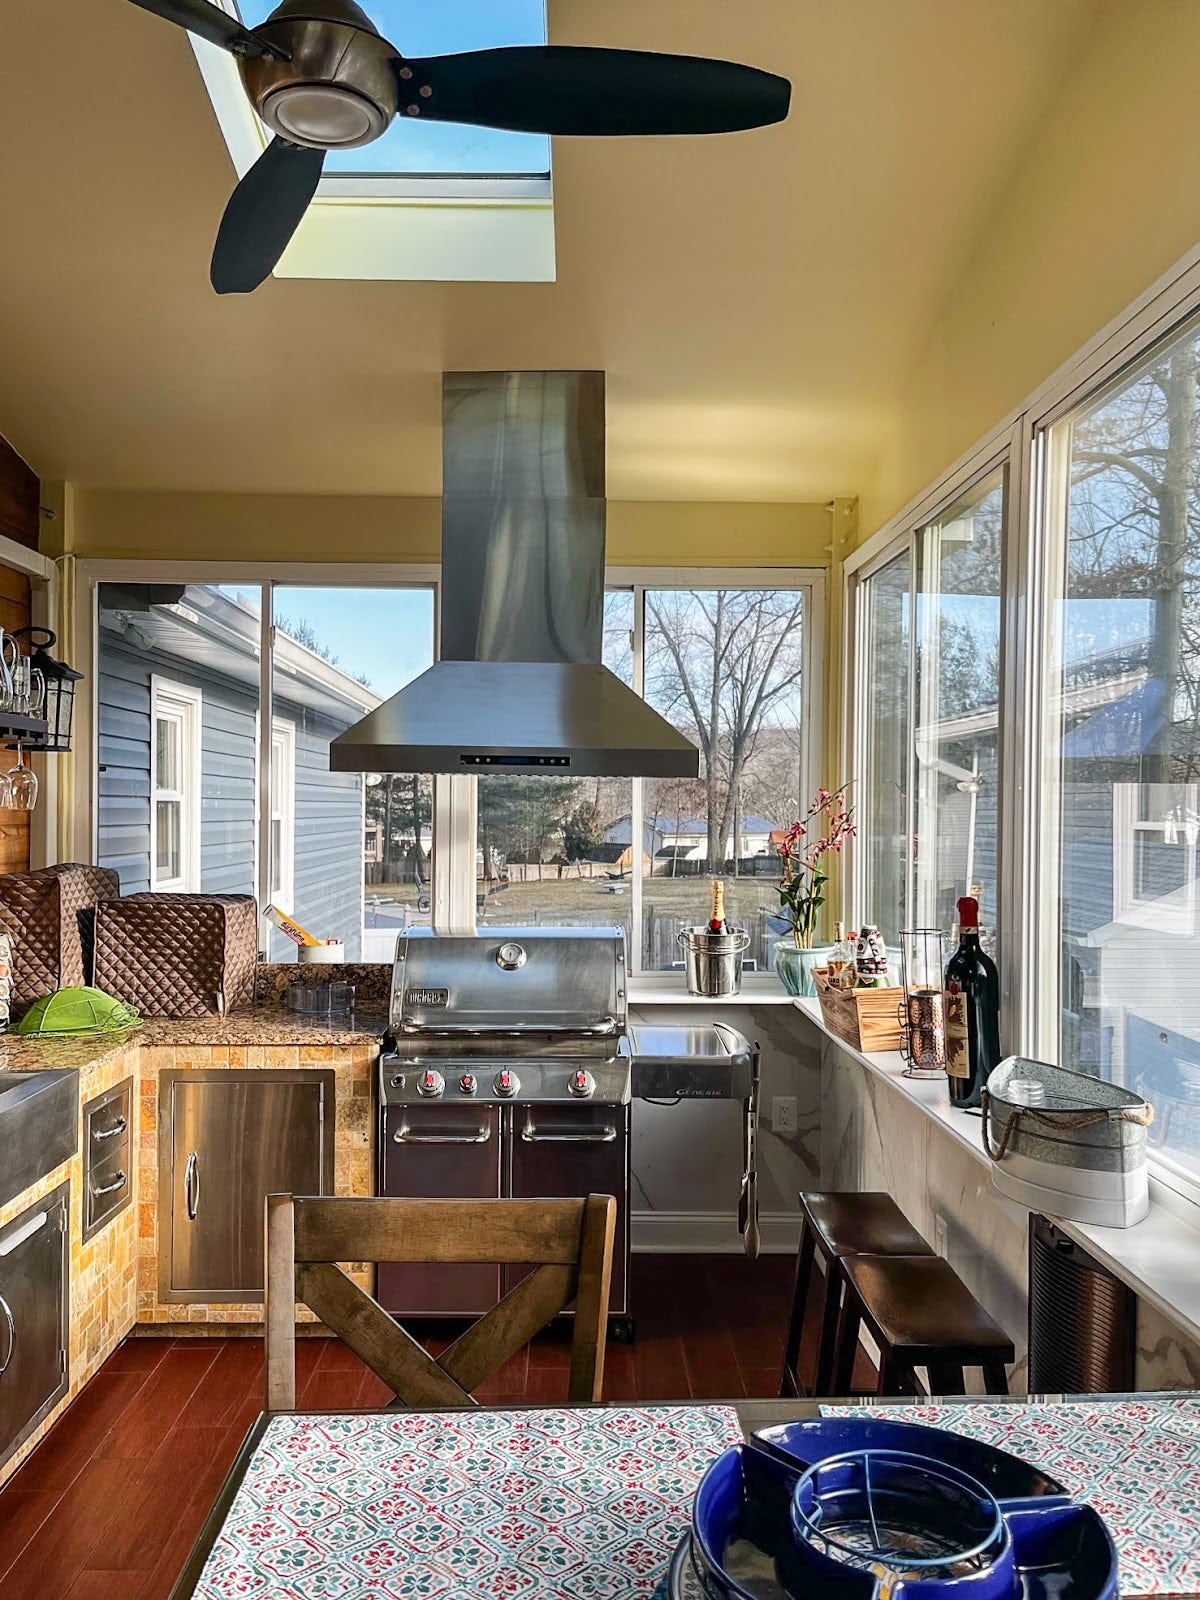 Bright and homey kitchen nook featuring an indoor grilling station with a view of the neighborhood through surrounding windows. - Proline Range Hoods - prolinerangehoods.com 